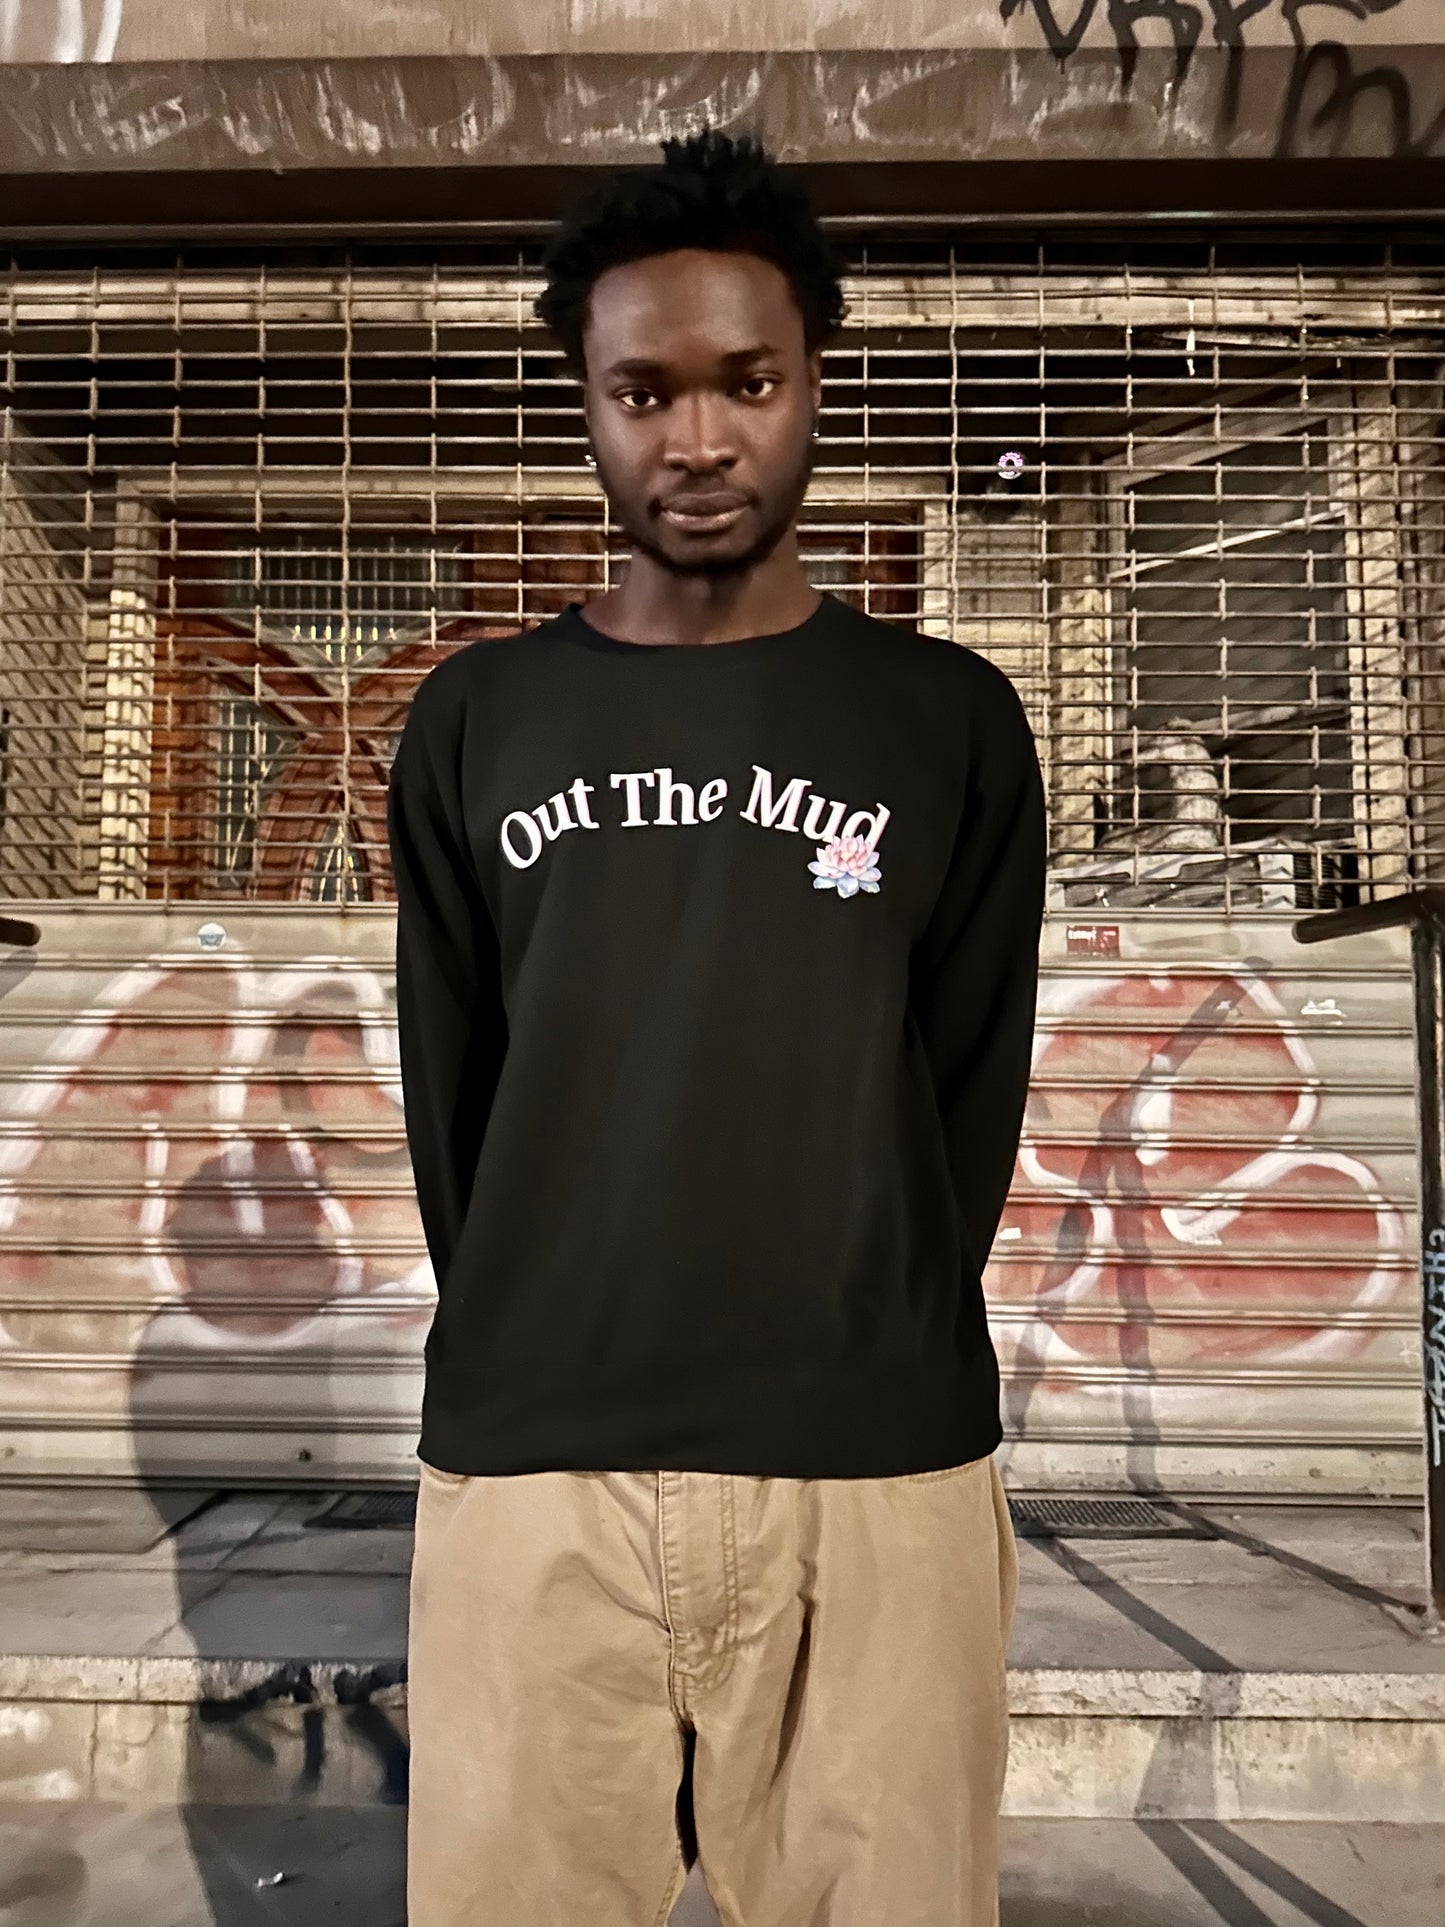 black out the mud crewneck sweater with psalm 40 1 and 2 scripture and lotus flower design